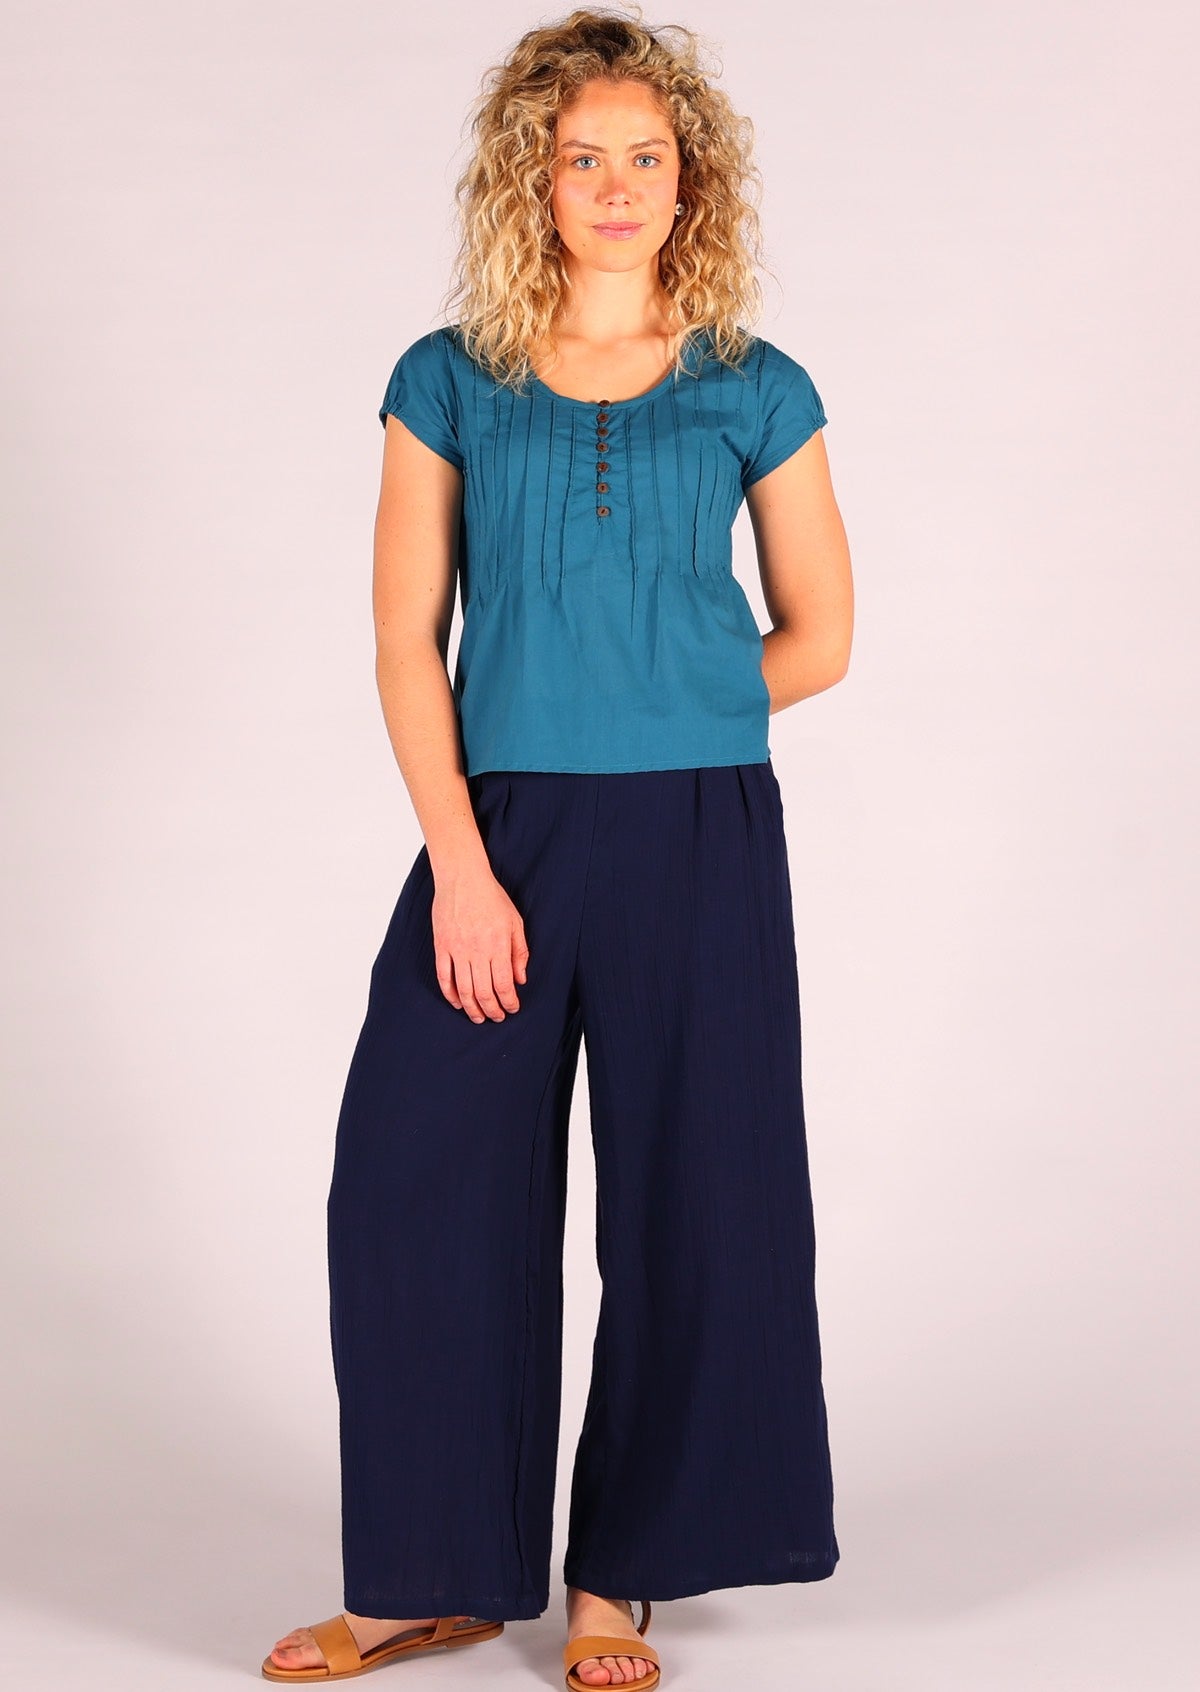 Double cotton high waisted wide leg pants in dark blue